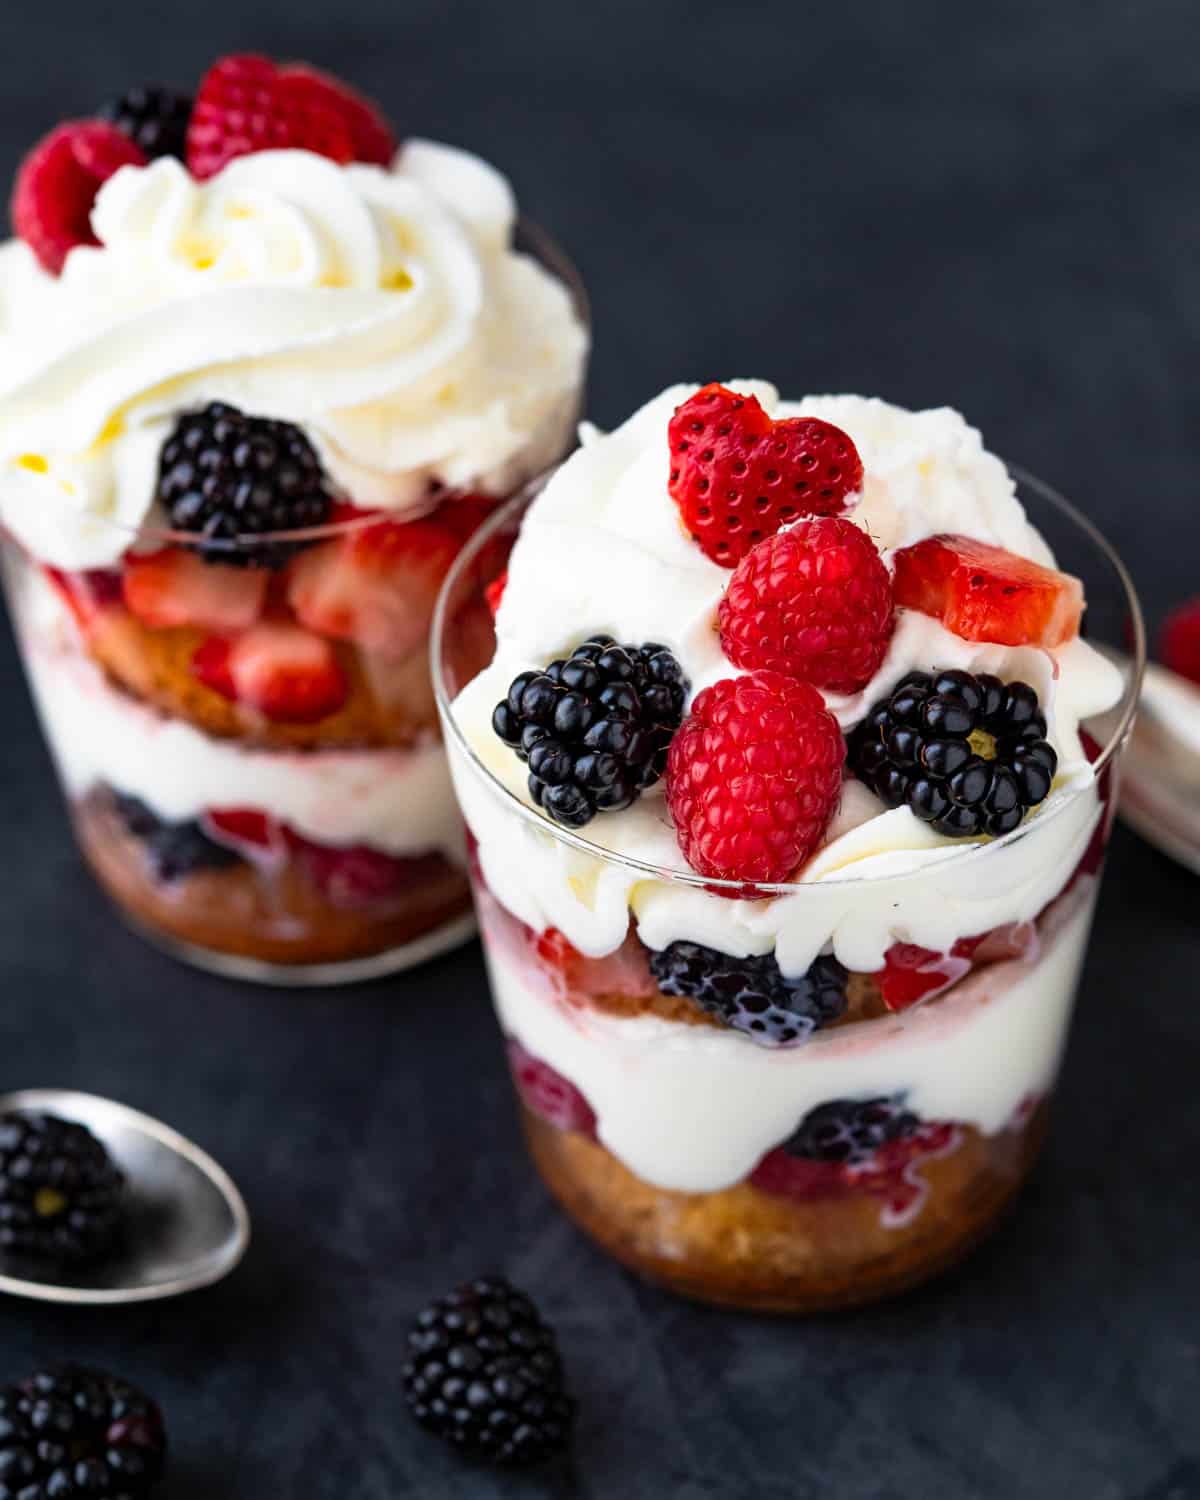 Two layered strawberry and mixed berry parfaits with mascarpone cream.